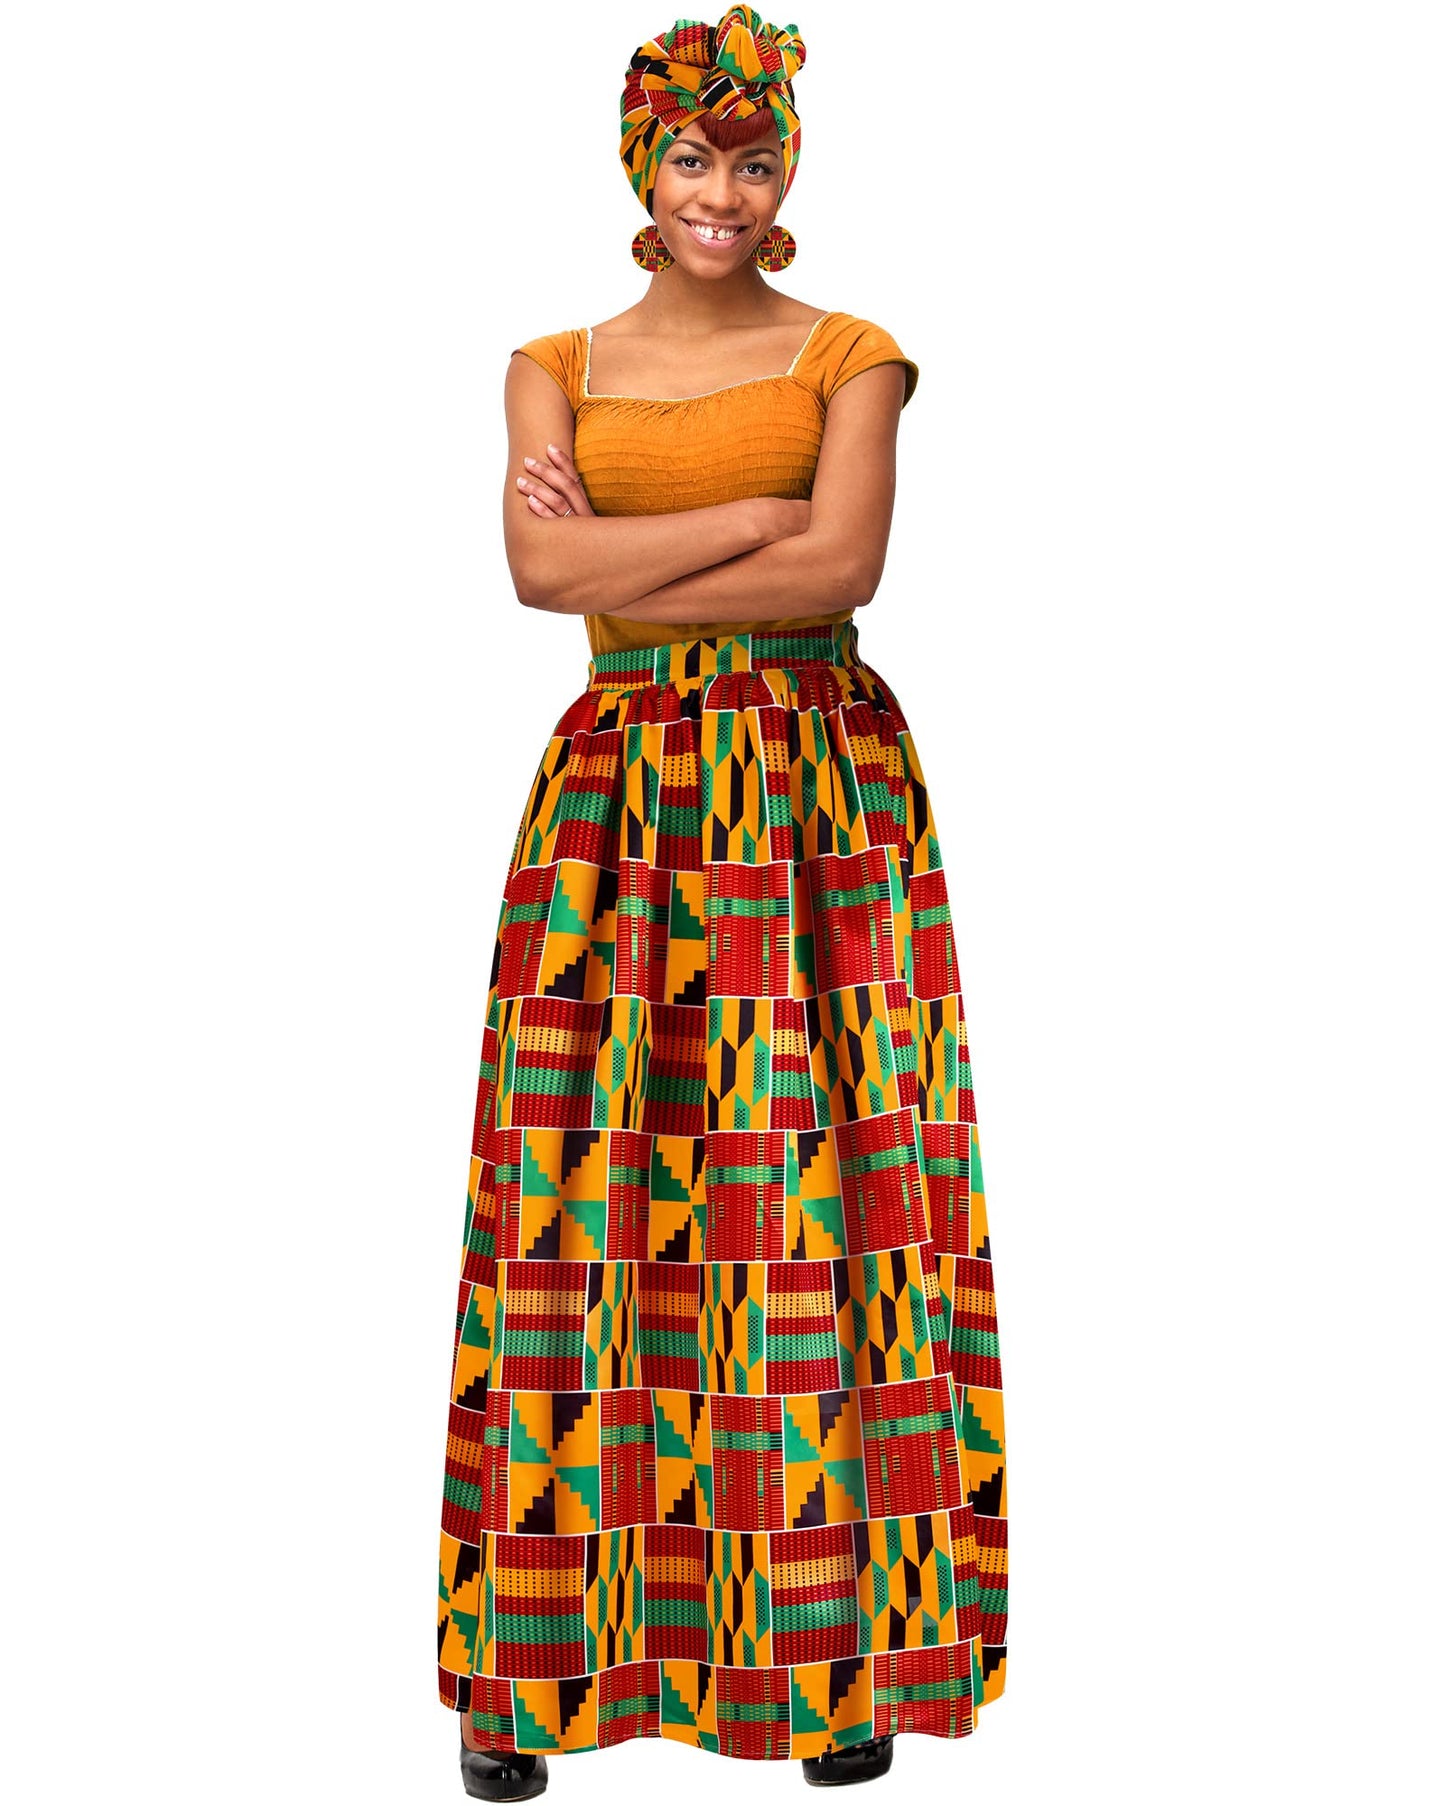 3 Pcs Women African Printed Maxi Skirt A Line Skirt with Pockets AND Accessories